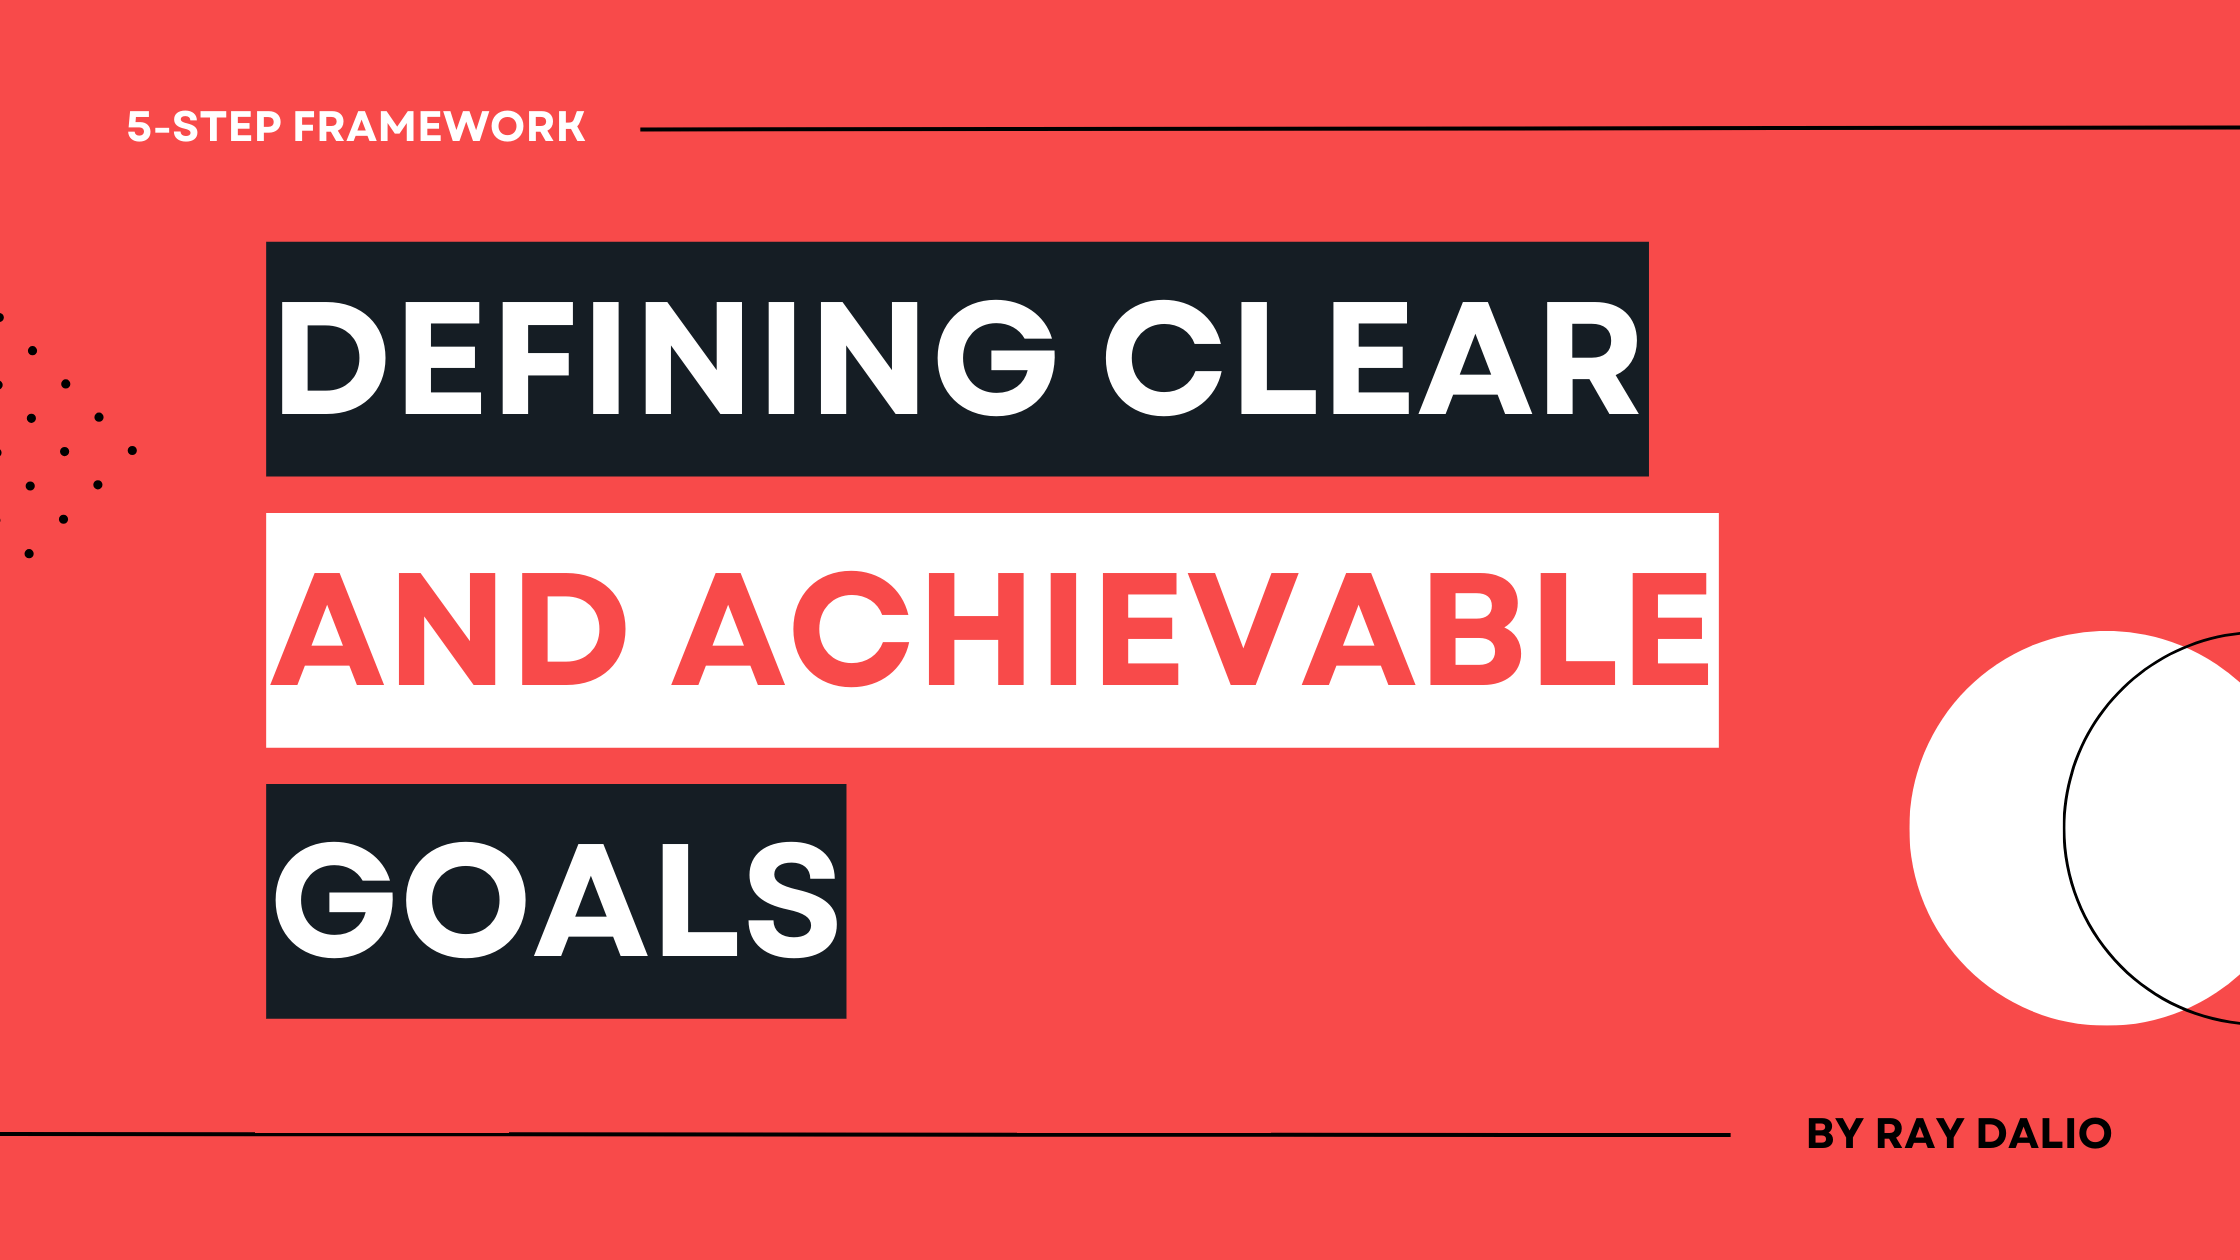 Step 1 - Defining Clear and Achievable Goals 